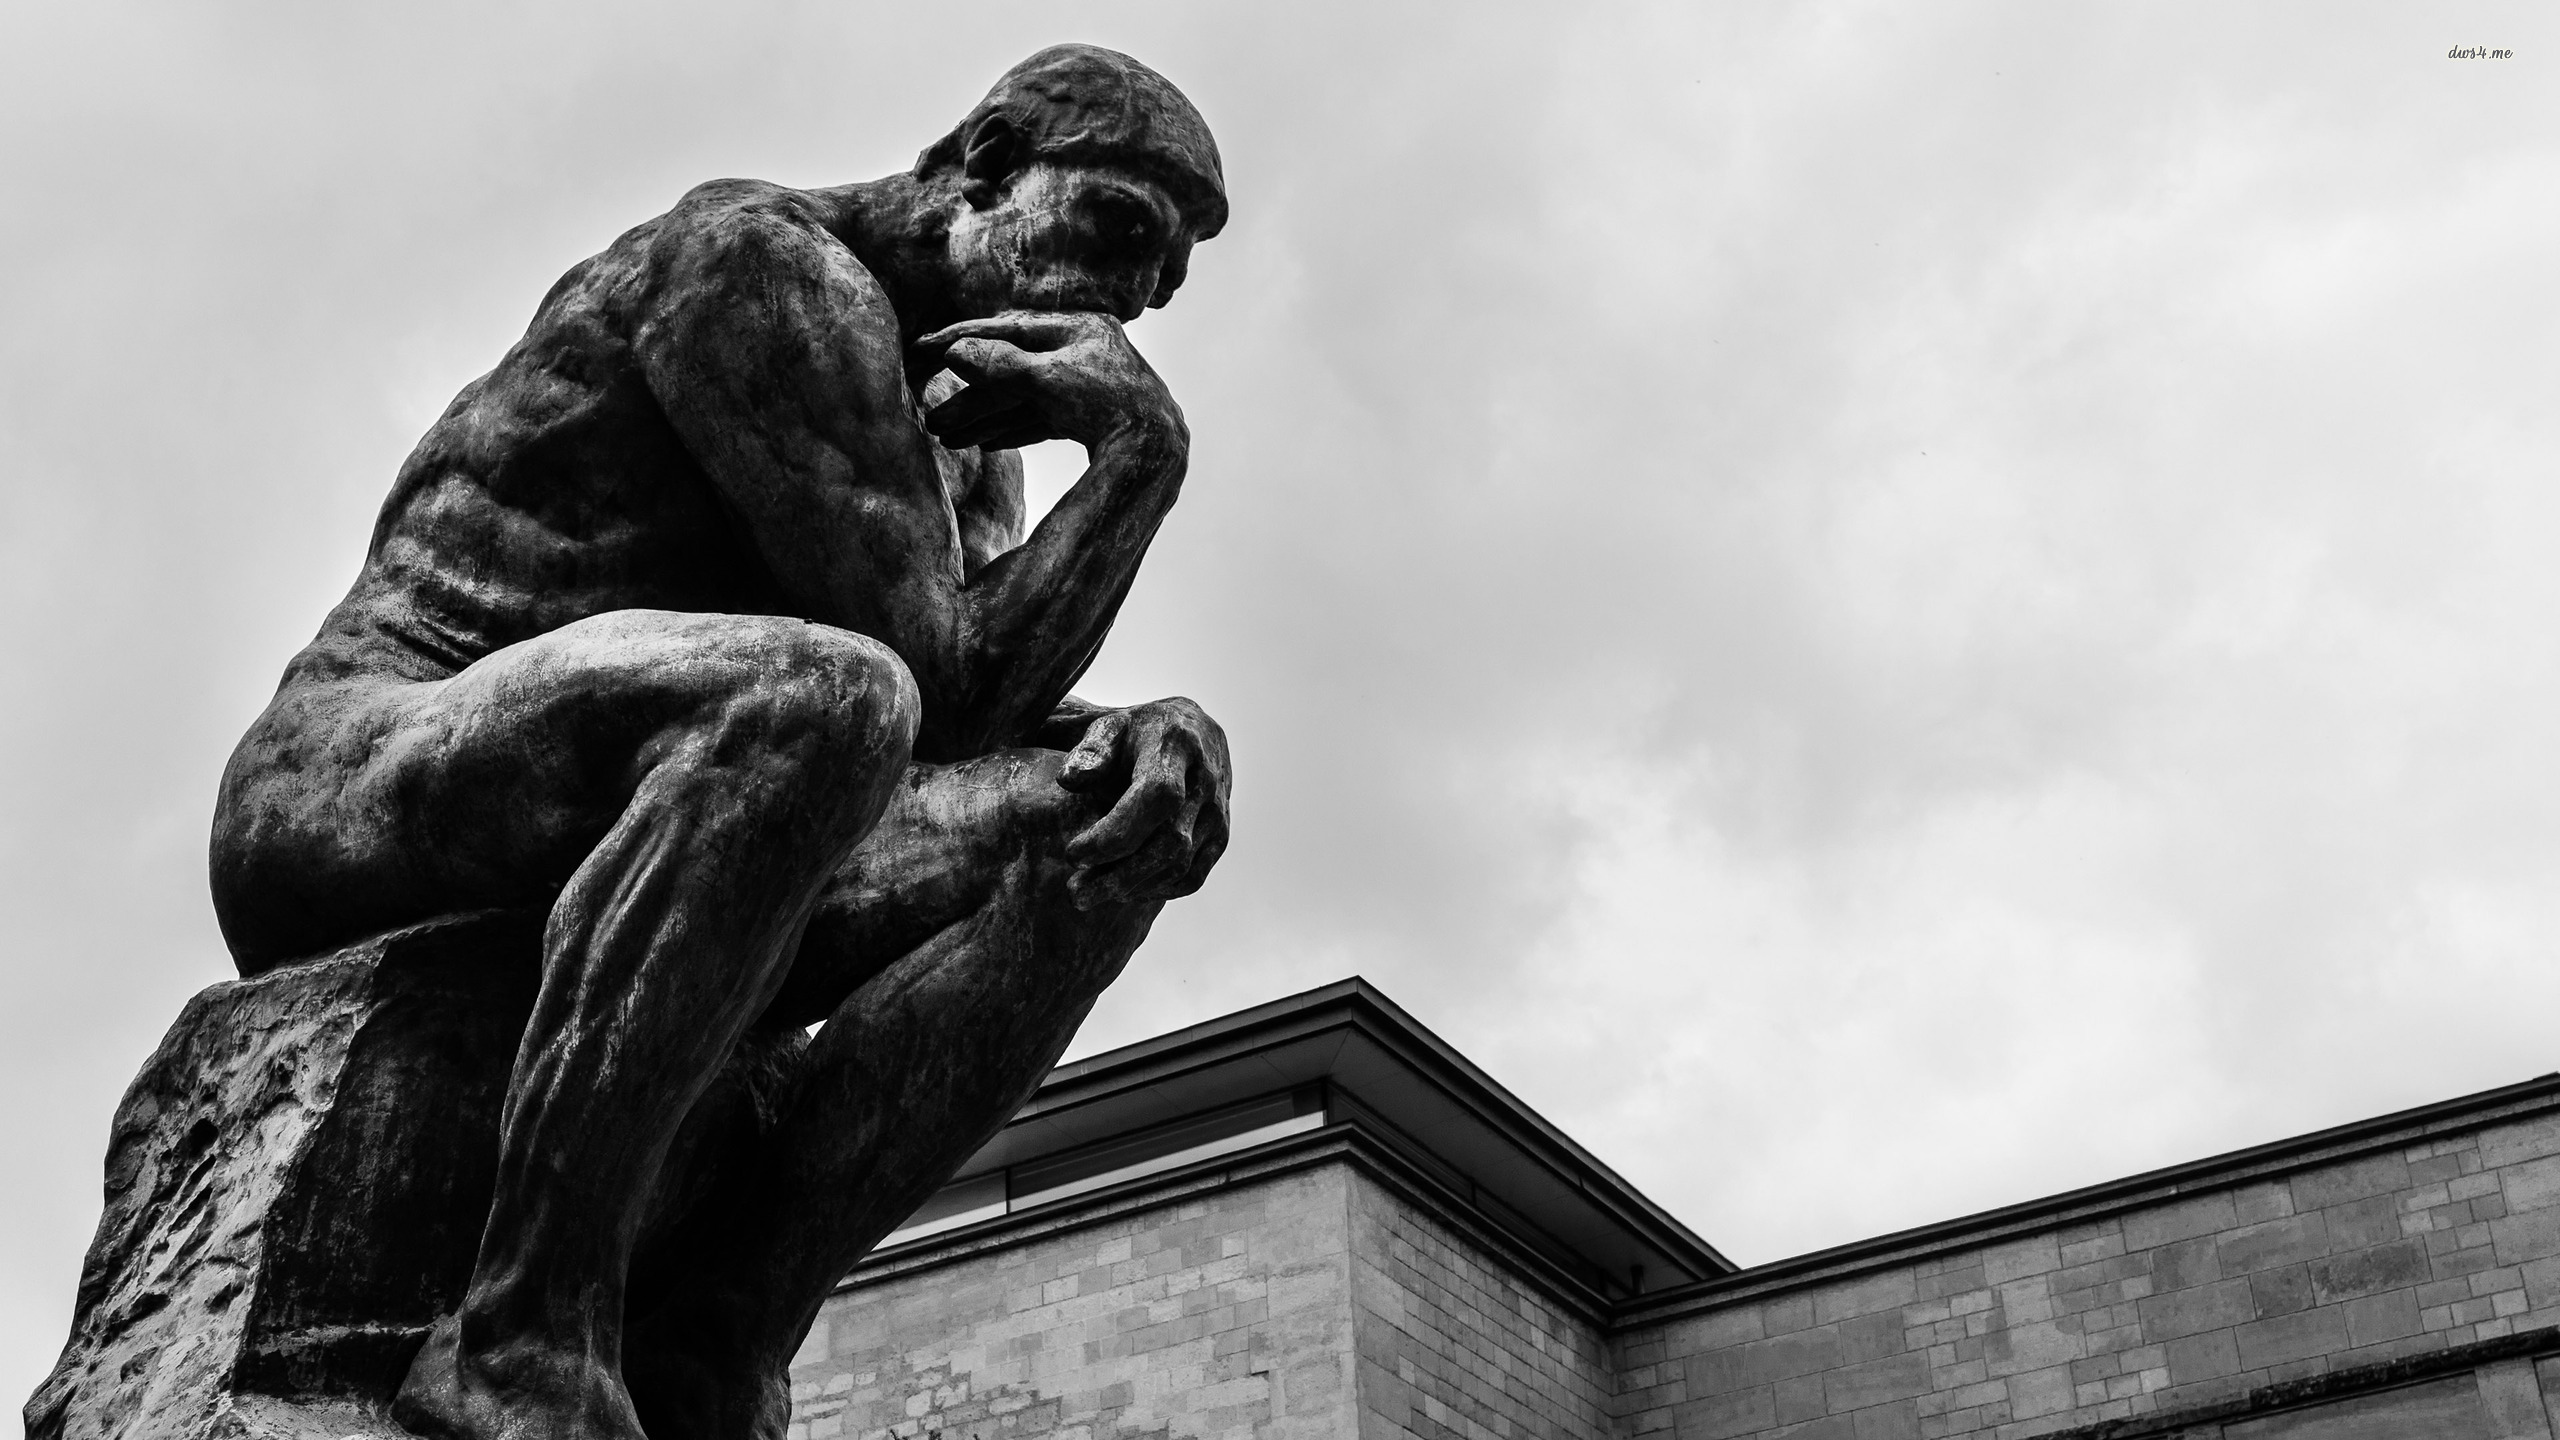 The Thinker wallpaper - Photography wallpapers - #34079